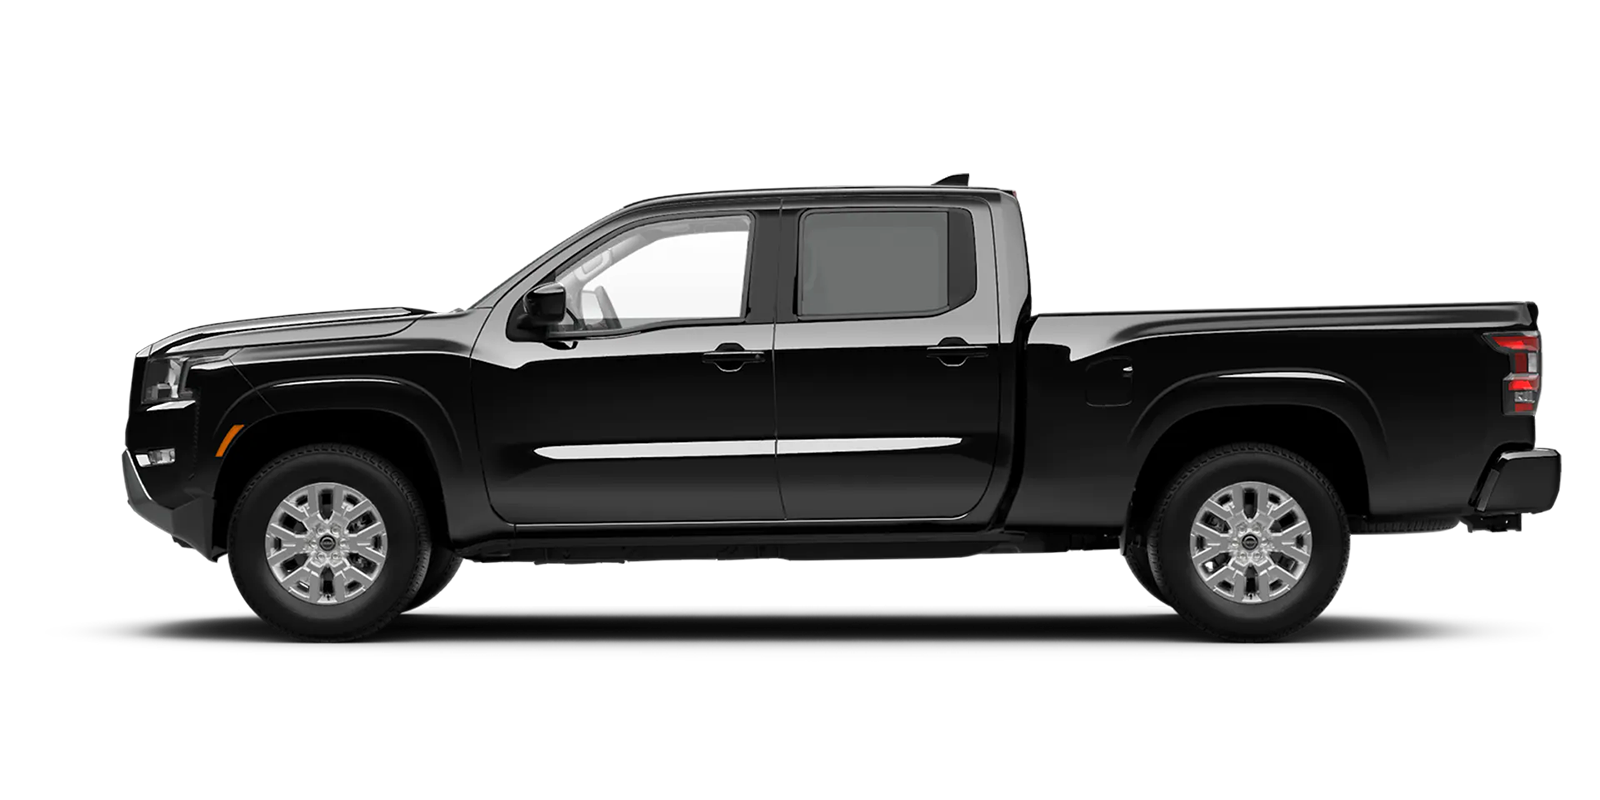 2022 Frontier Crew Cab Long Bed SV 4x2 in Super Black | Vann York's High Point Nissan in High Point NC